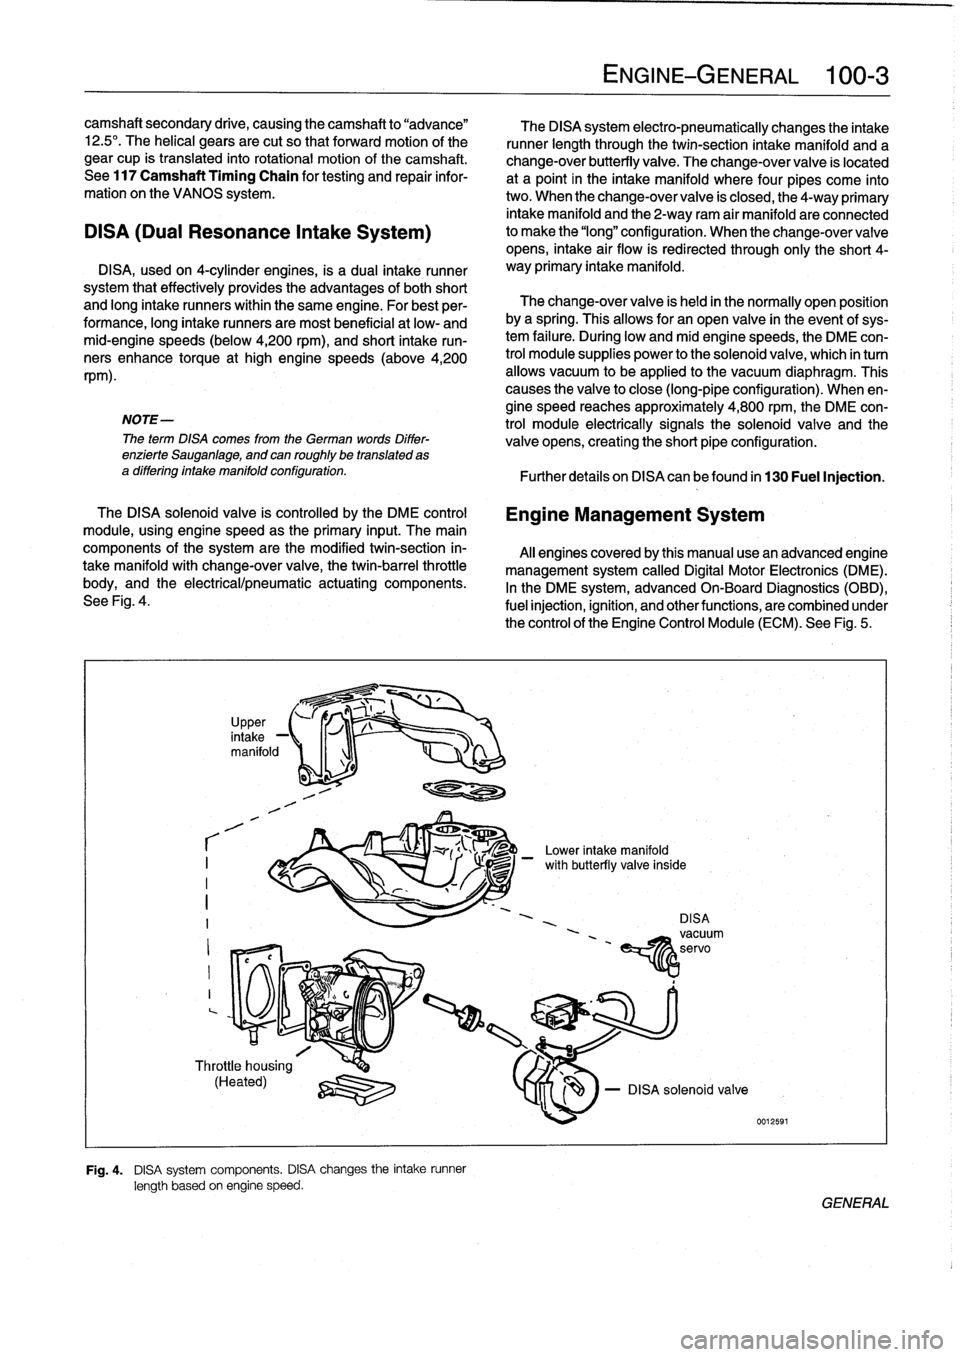 BMW 328i 1993 E36 Workshop Manual camshaft
secondary
drive,
causing
thecamshaft
to
"advance"

12
.5°
.
The
helical
gears
are
cut
so
that
forward
motion
of
the

gear
cup
is
transiated
into
rotational
motion
of
the
camshaft
.

See
117
